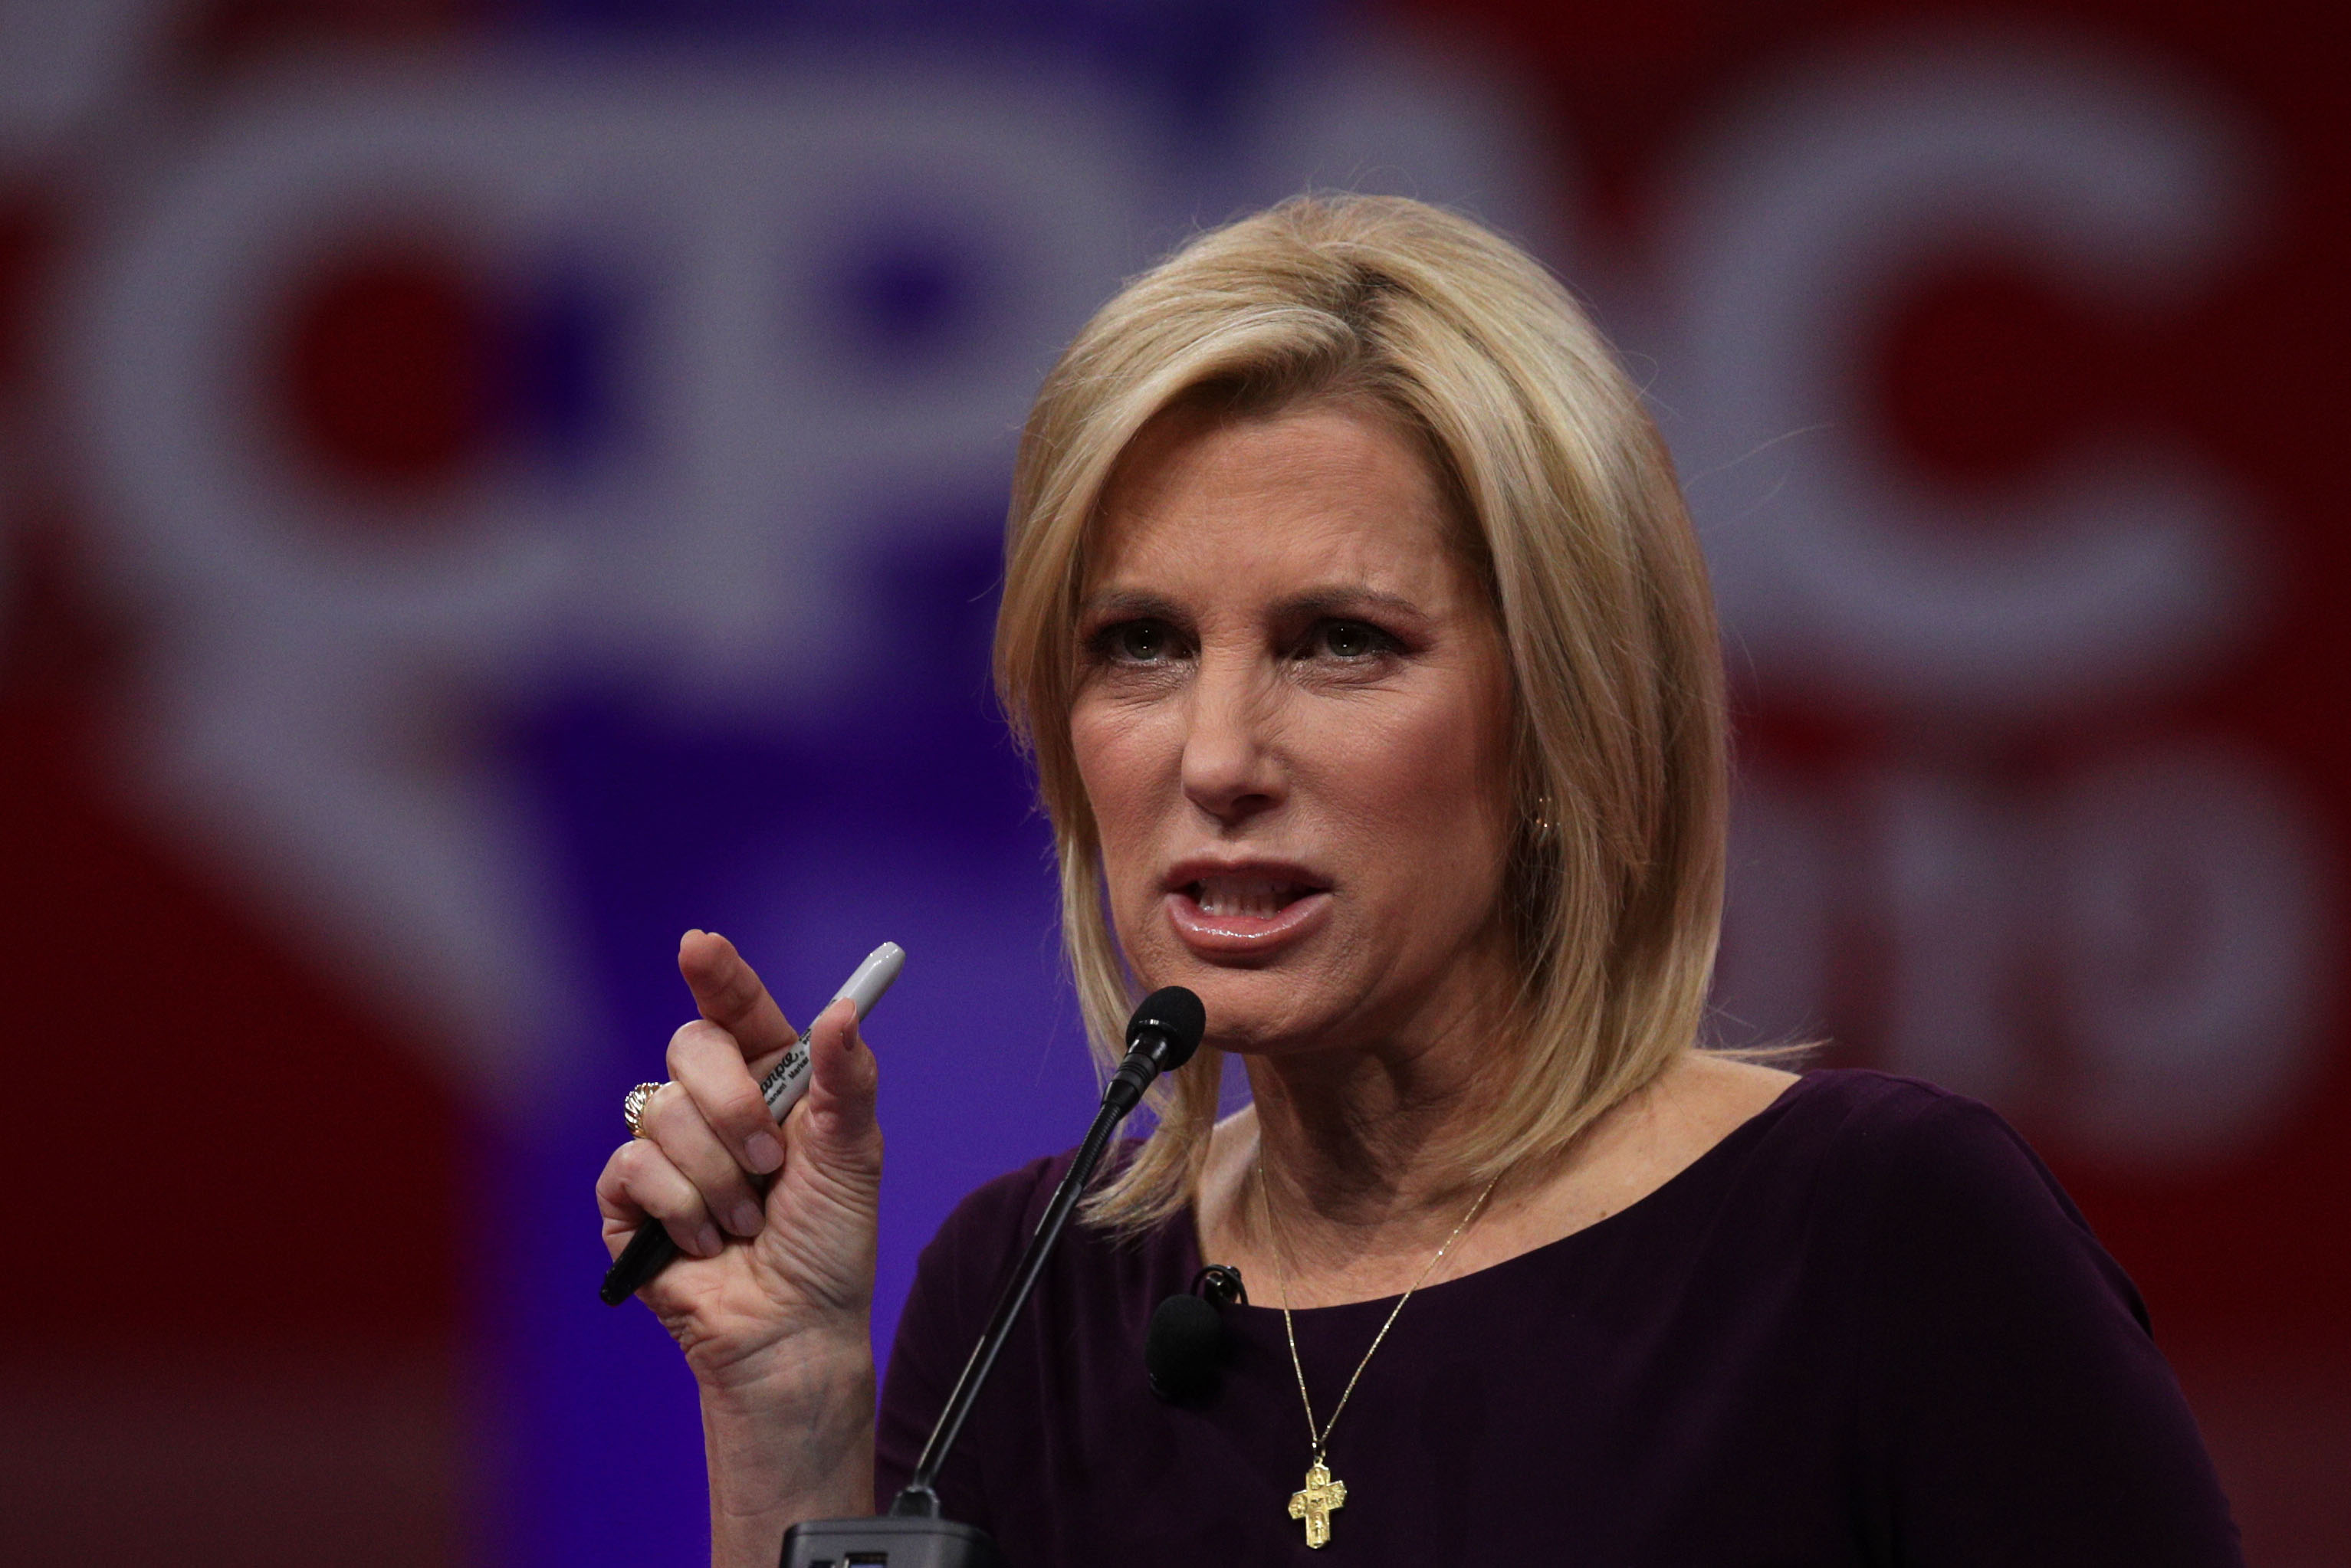 Laura Ingraham Warns Corporations of 'Wrath of GOP' Over Voting Law